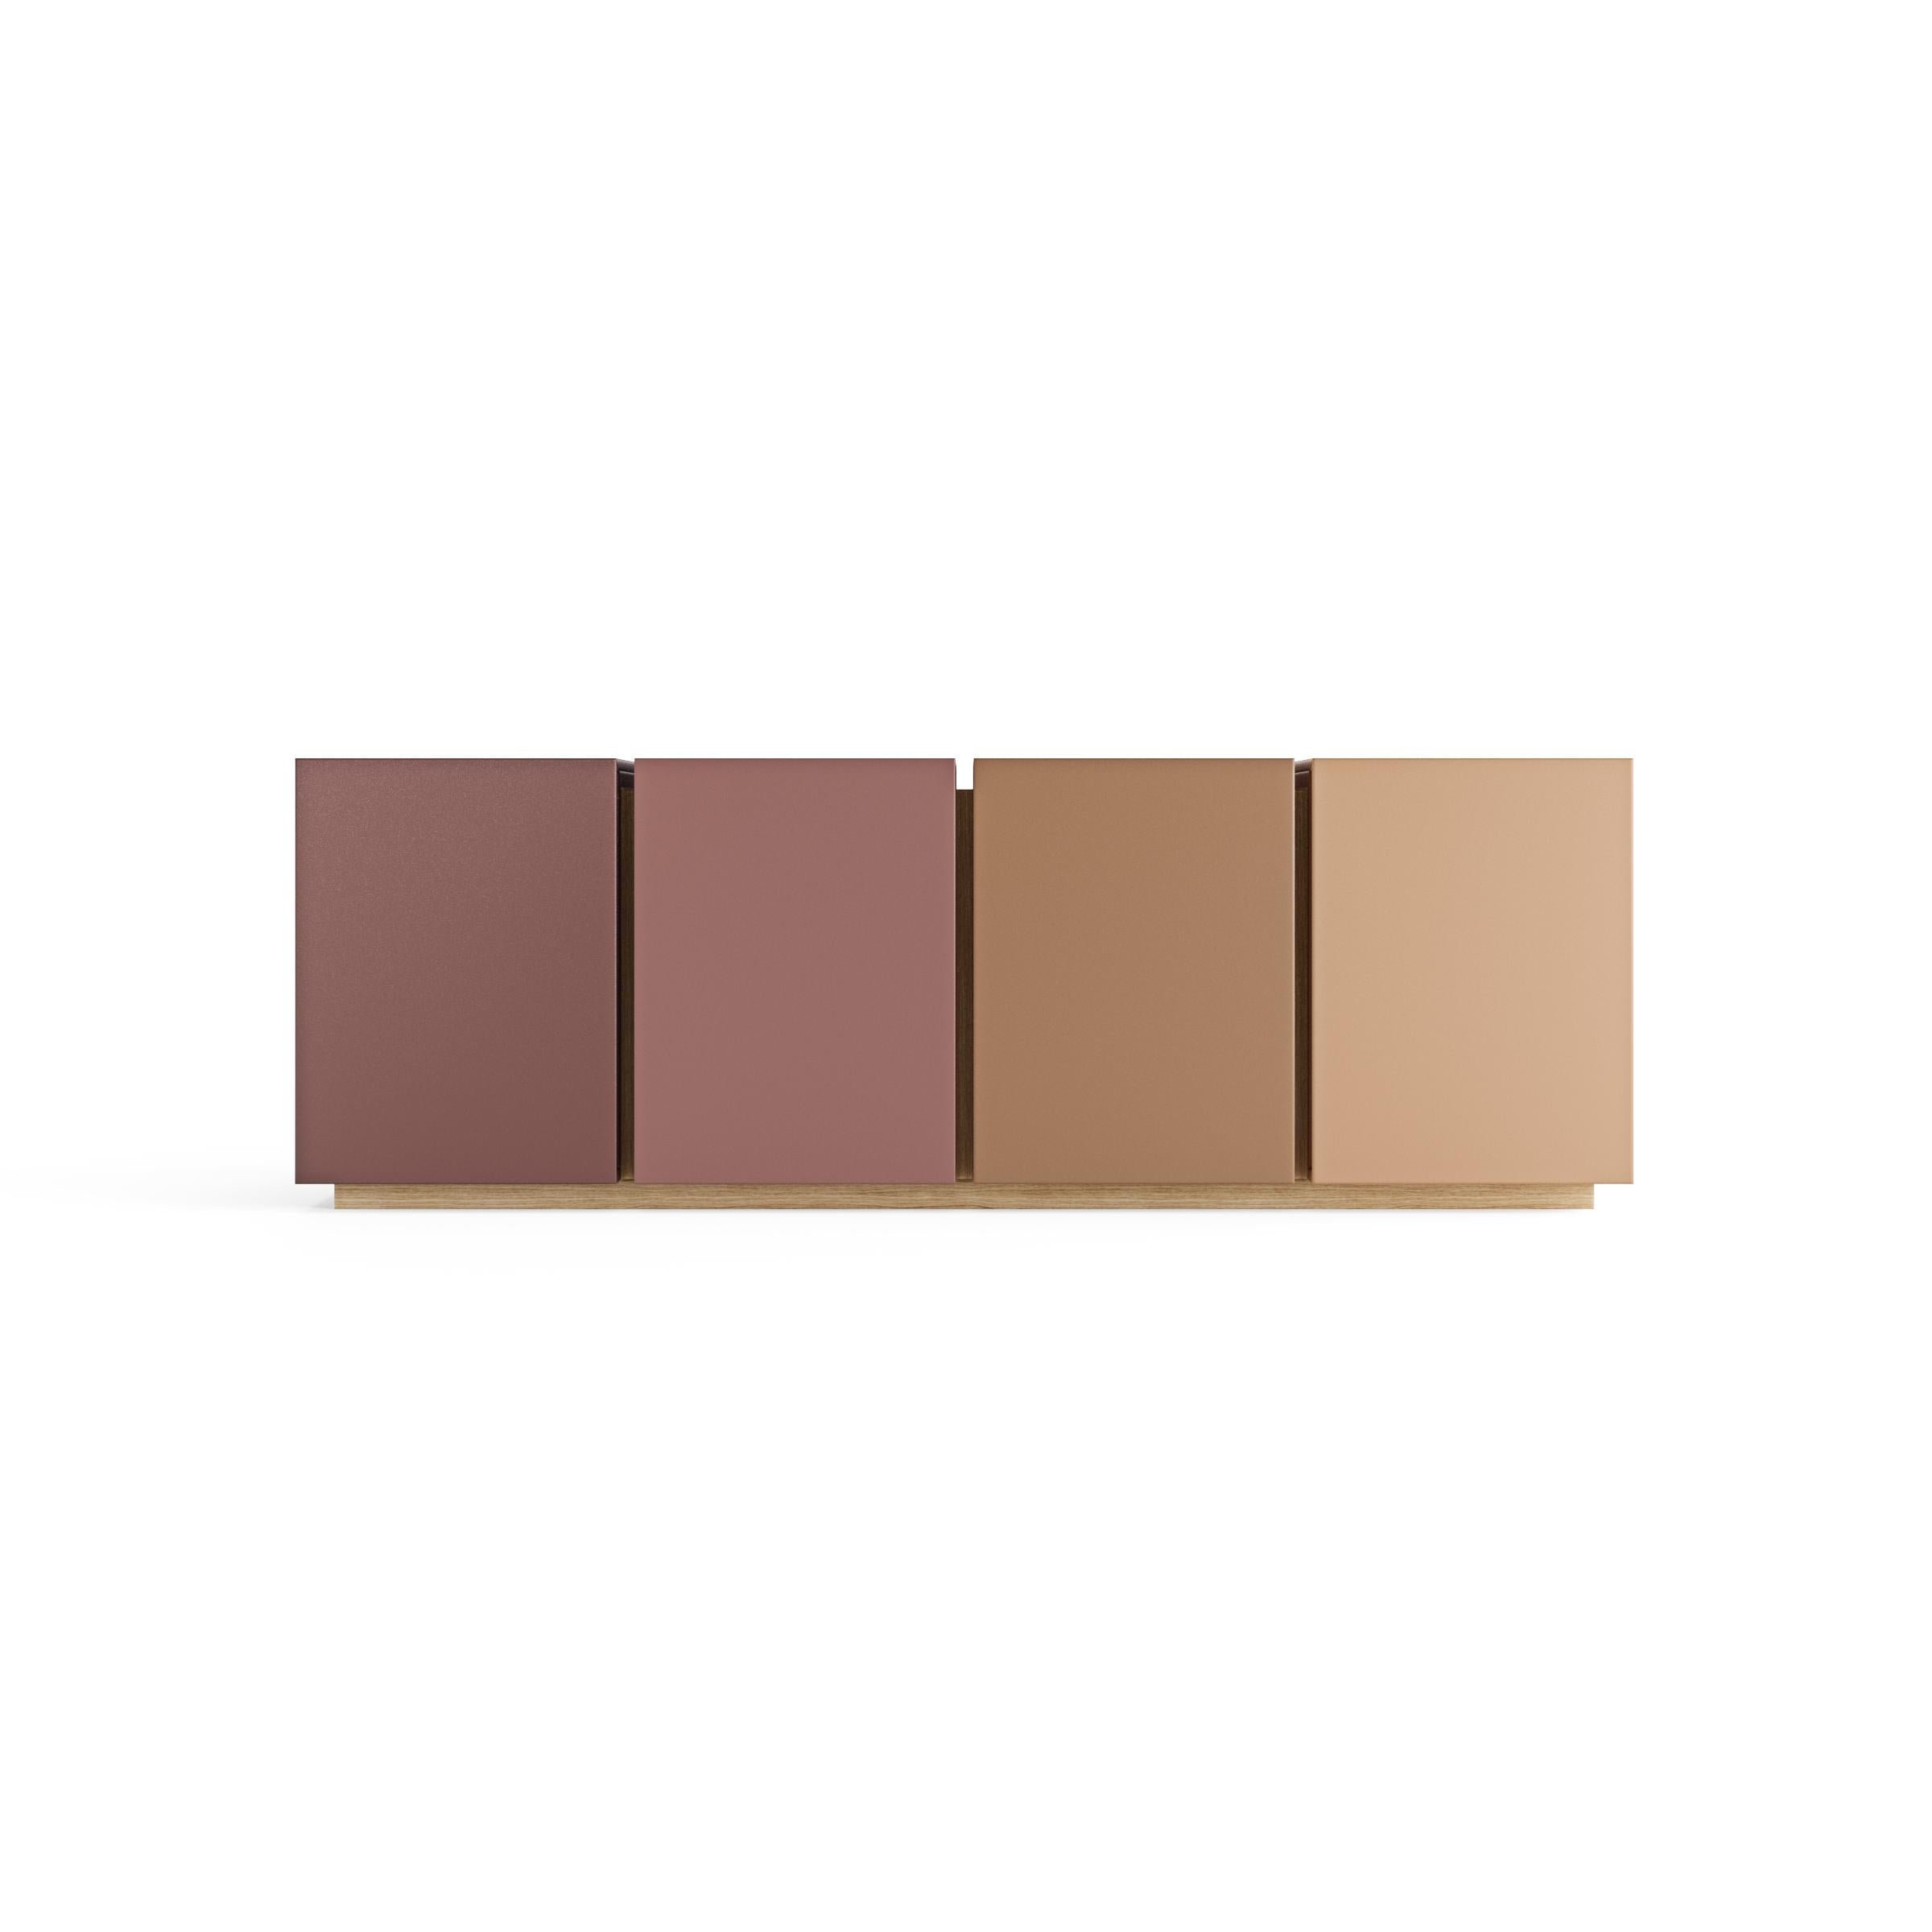 Blush is lacquered without gloss, in pastel tones, it can be customized to fit any pantone color you desire. 